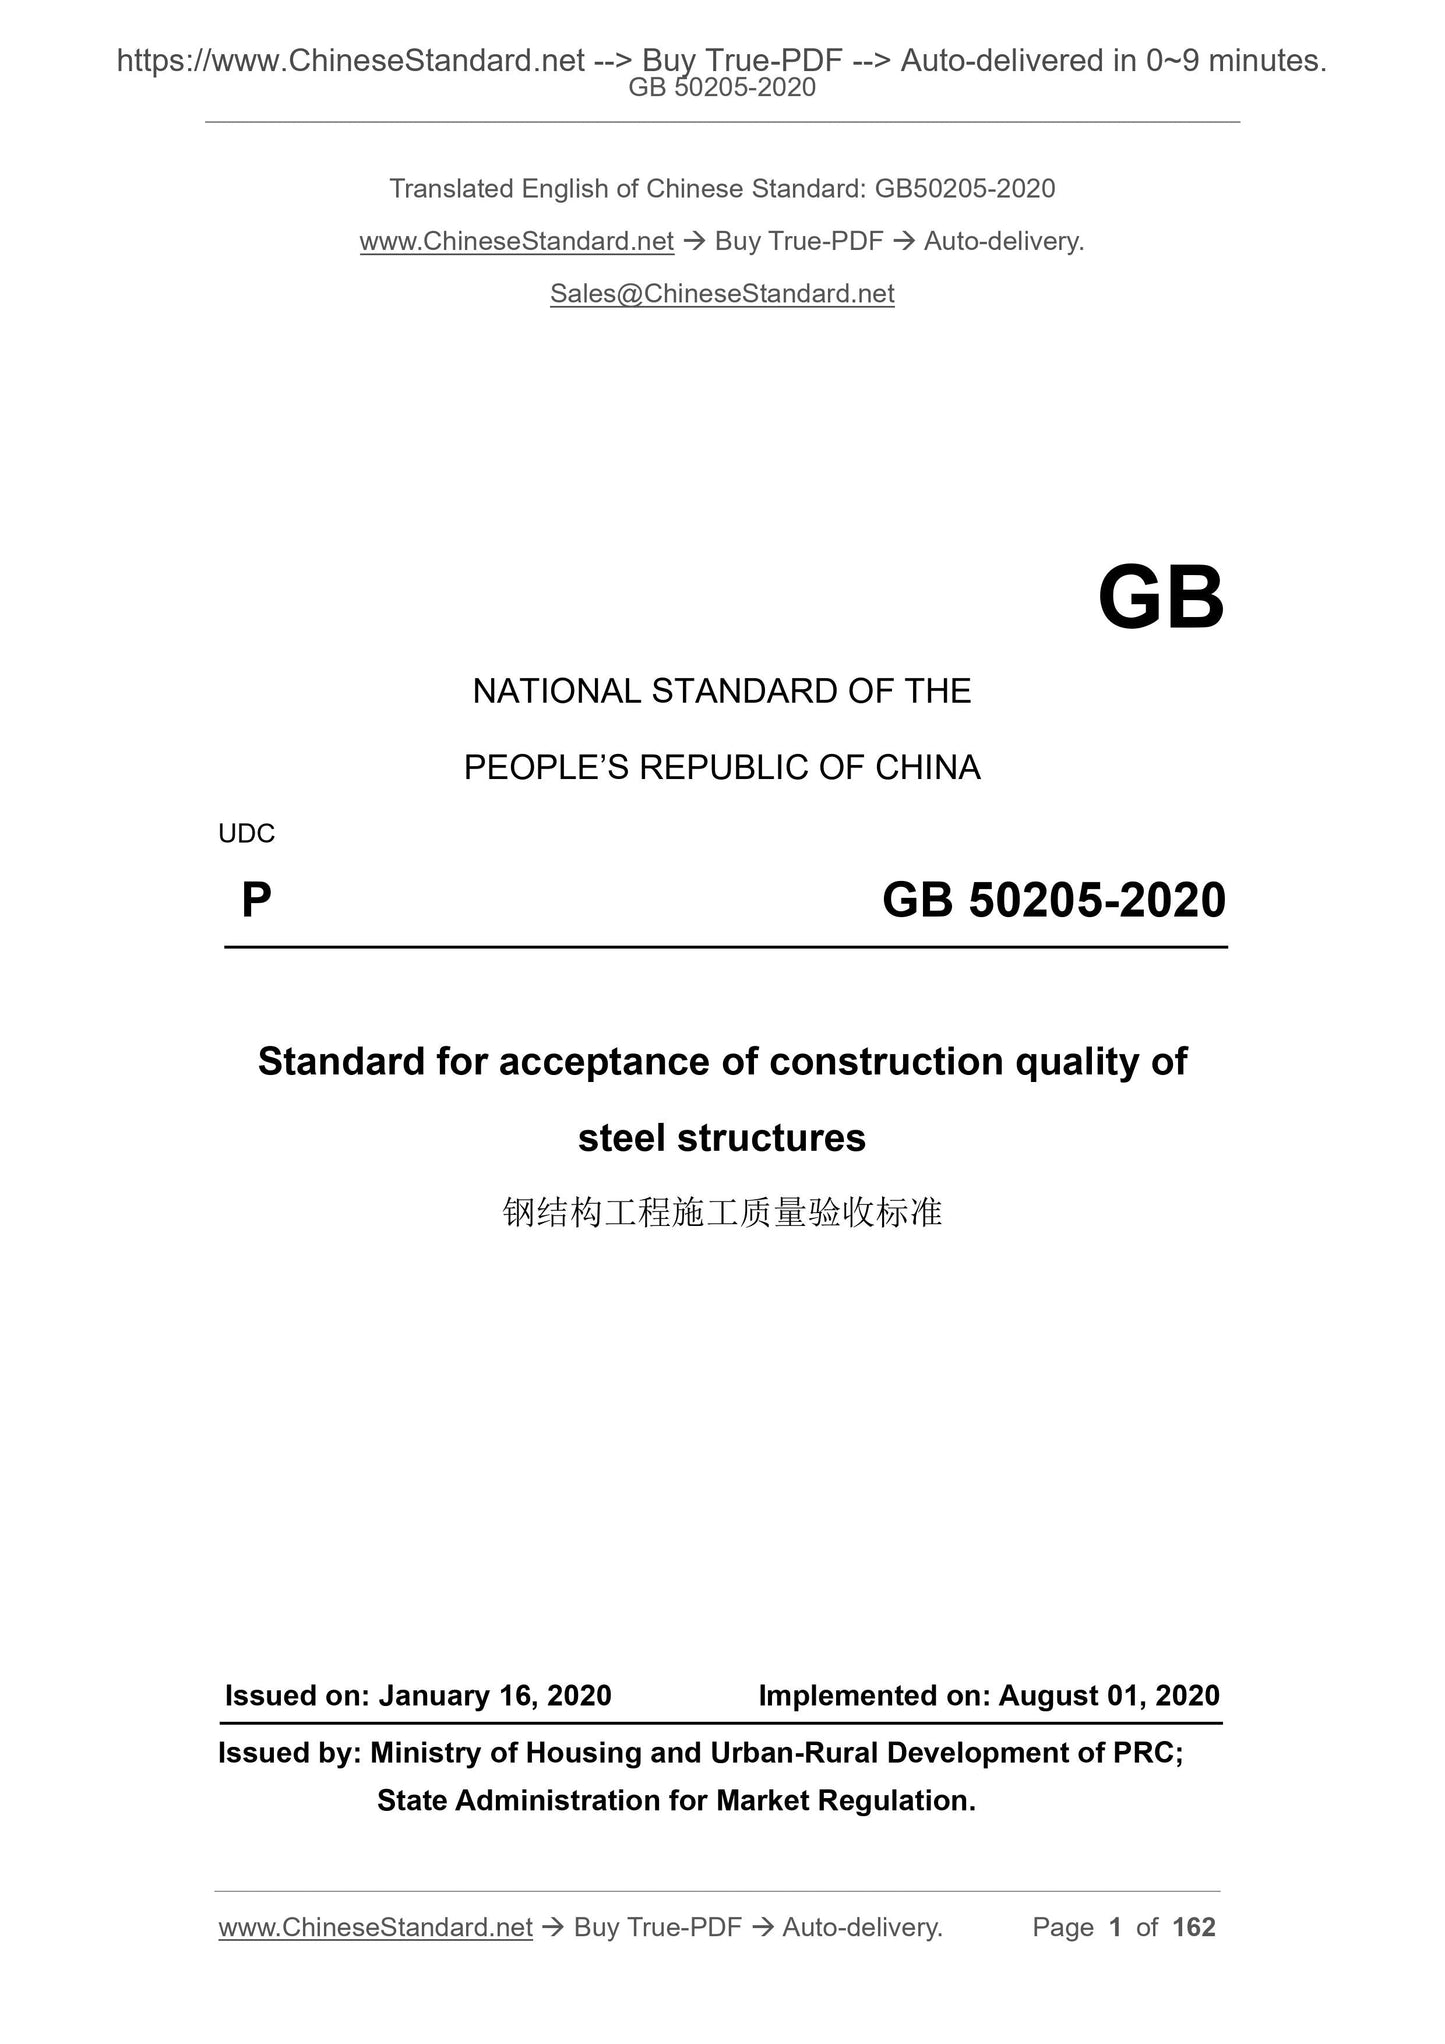 GB 50205-2020 Page 1